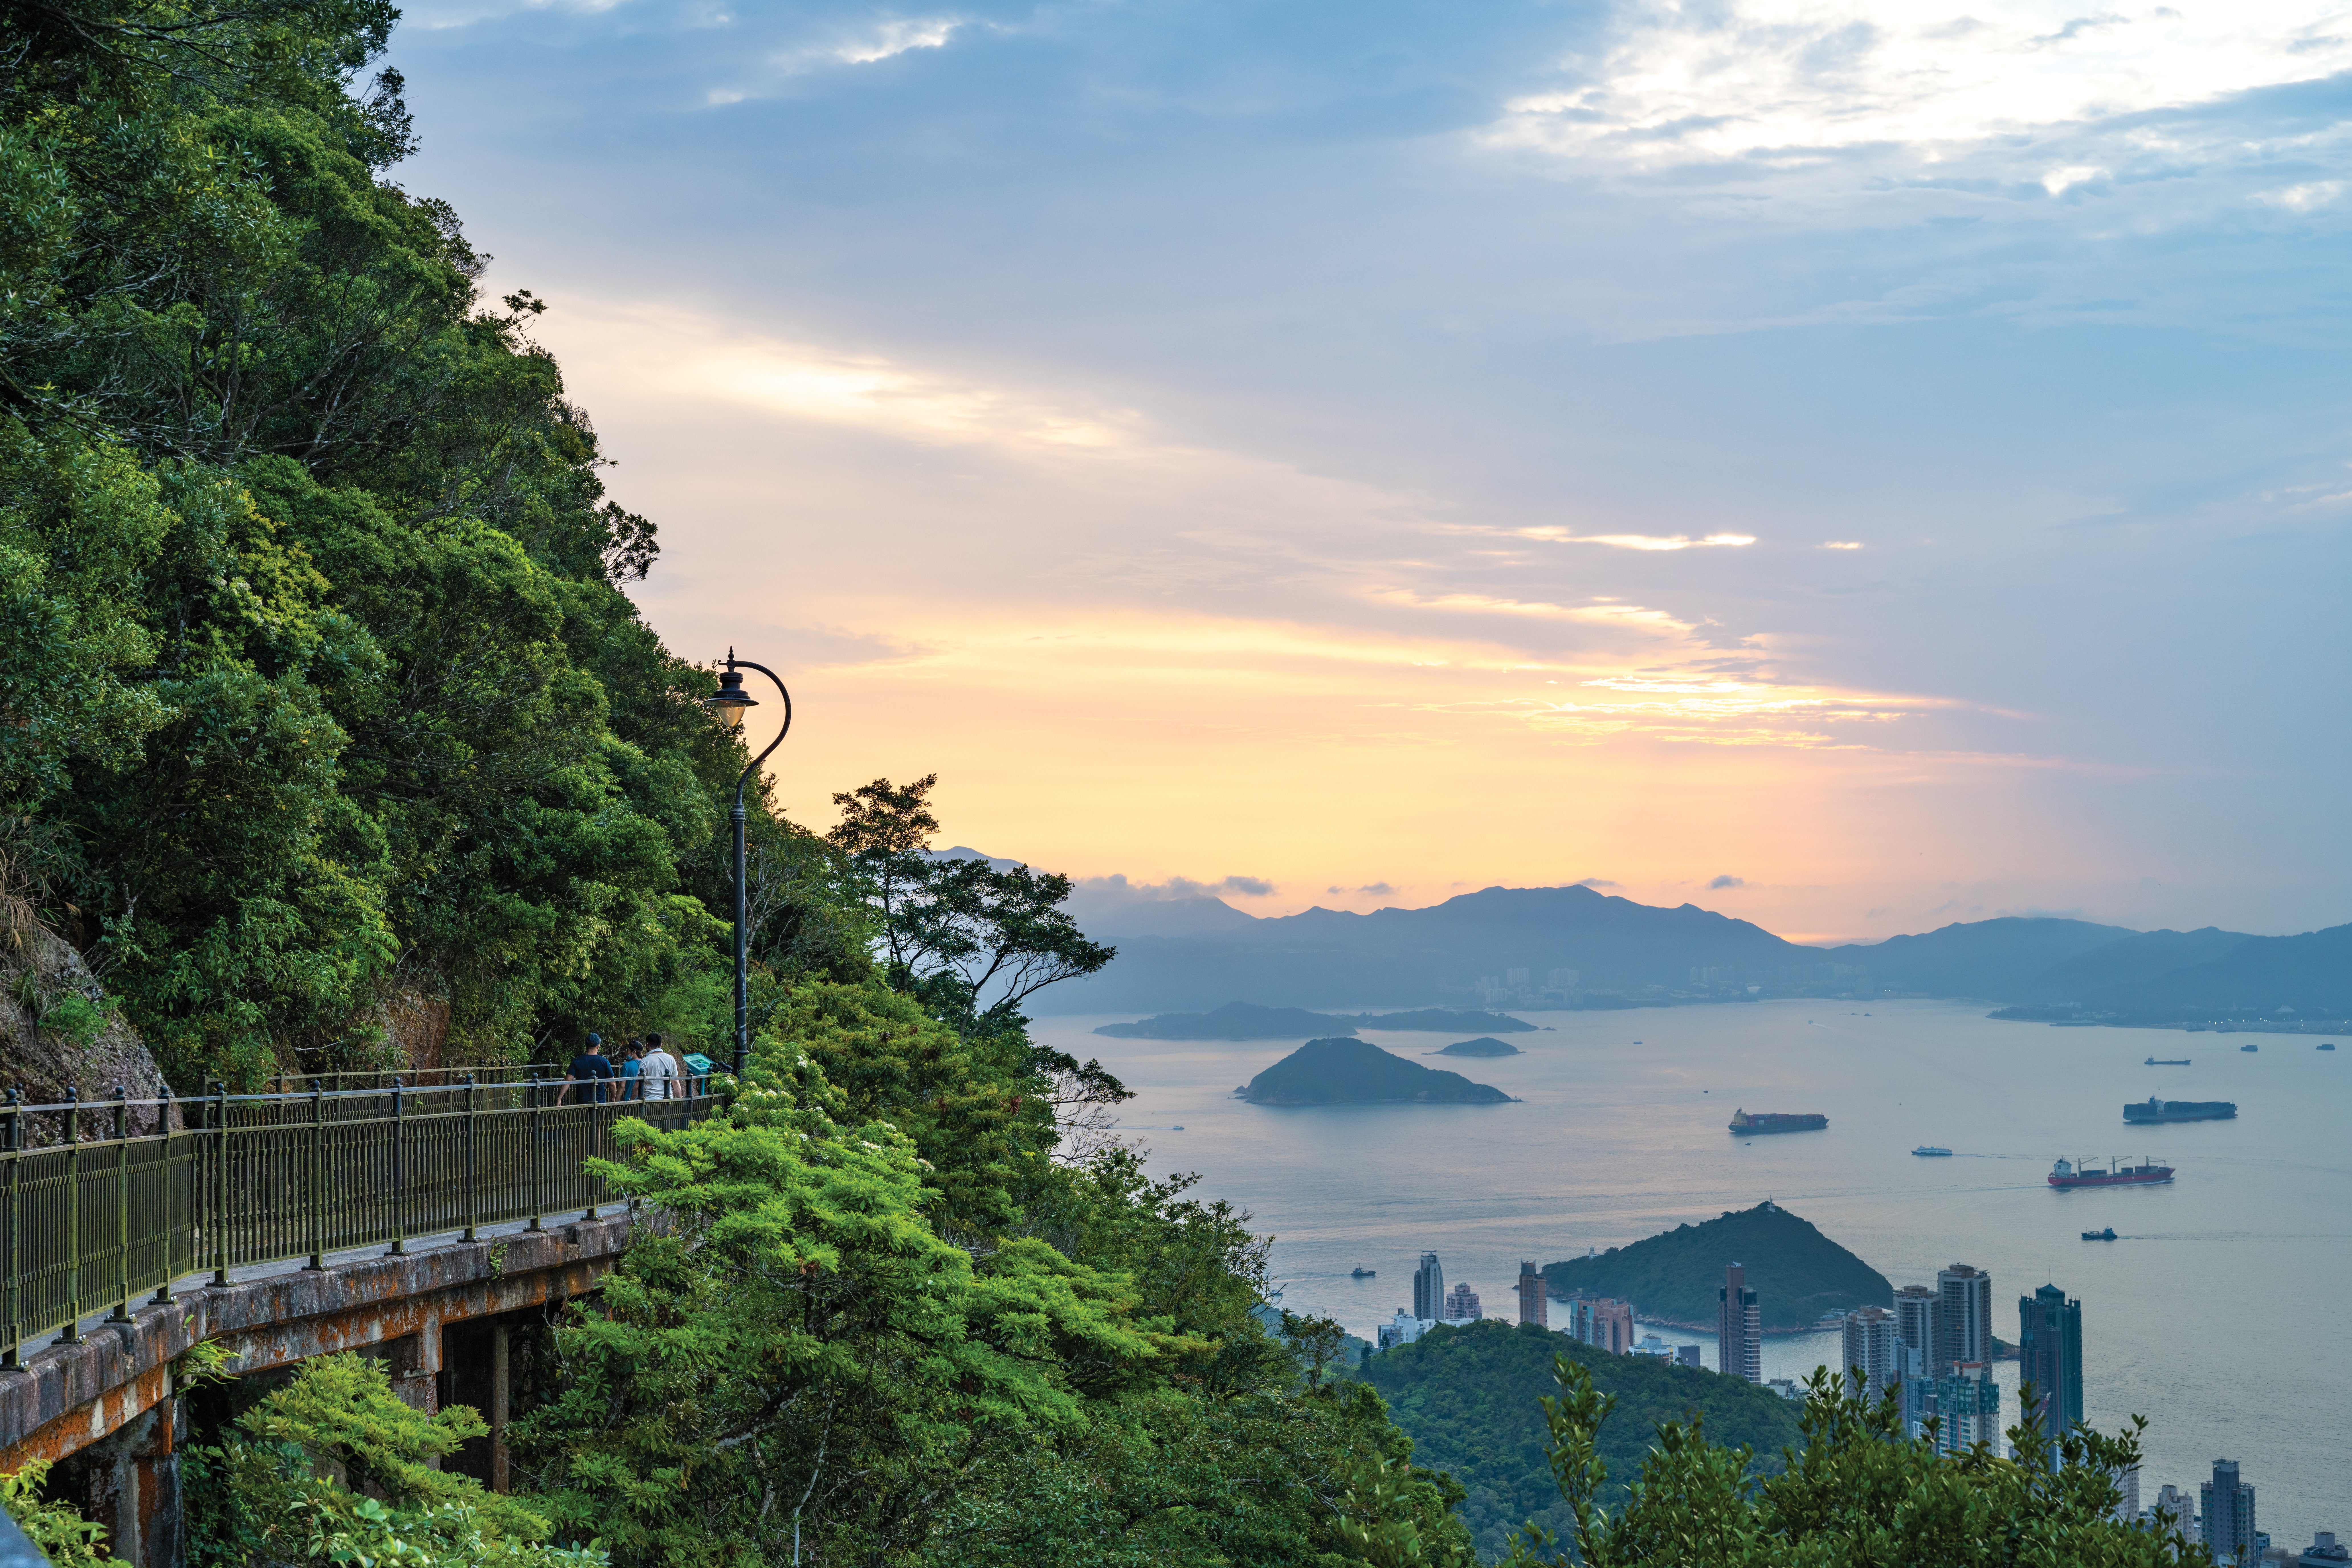 It’s not hard to see why a visit to Hong Kong Island for a spot of hiking and forest bathing is a salve for your mental wellbeing